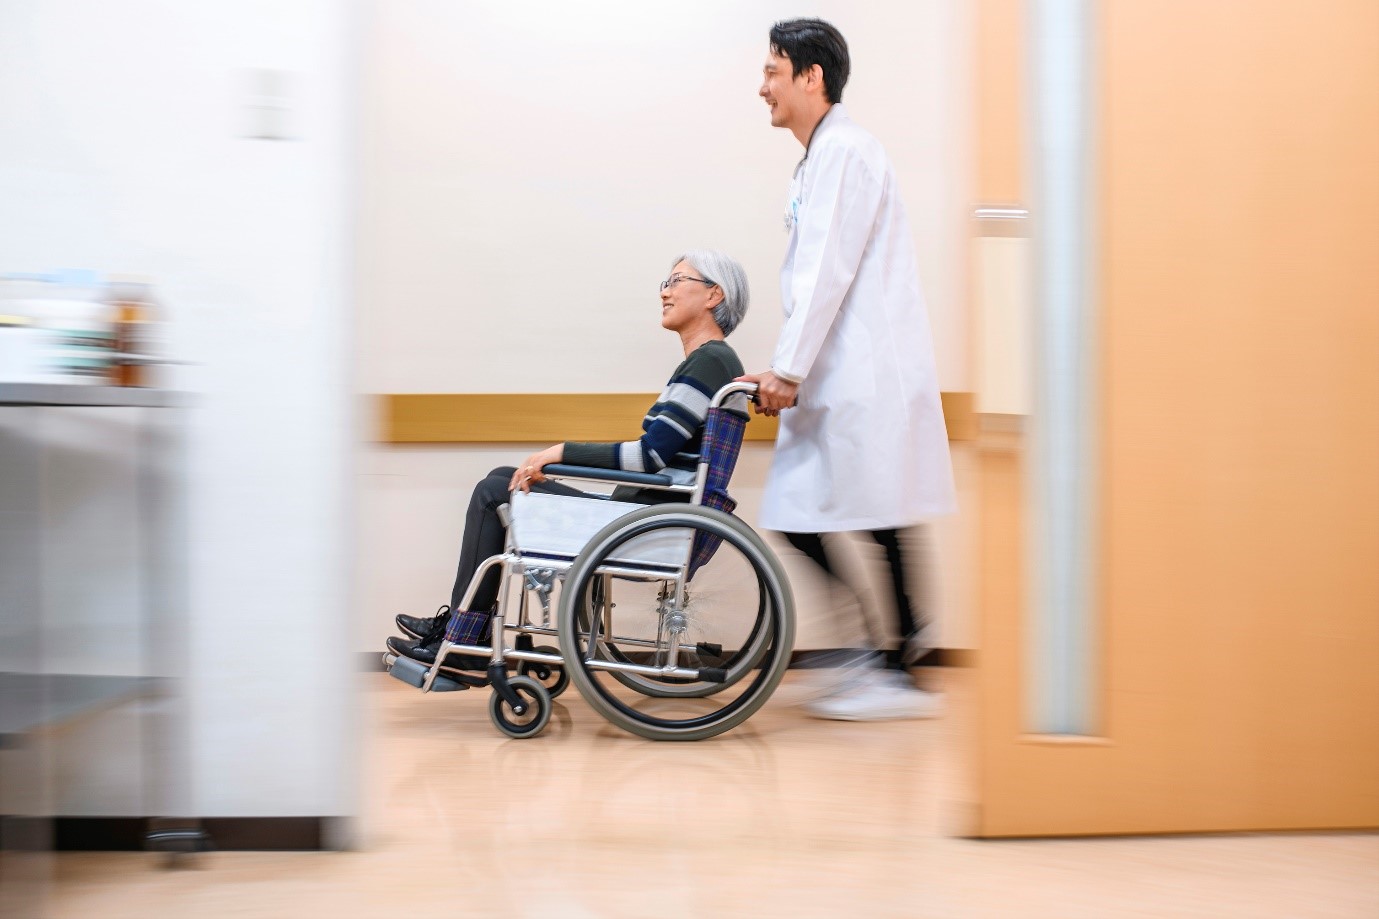 Doctor pushing patient in wheel chair